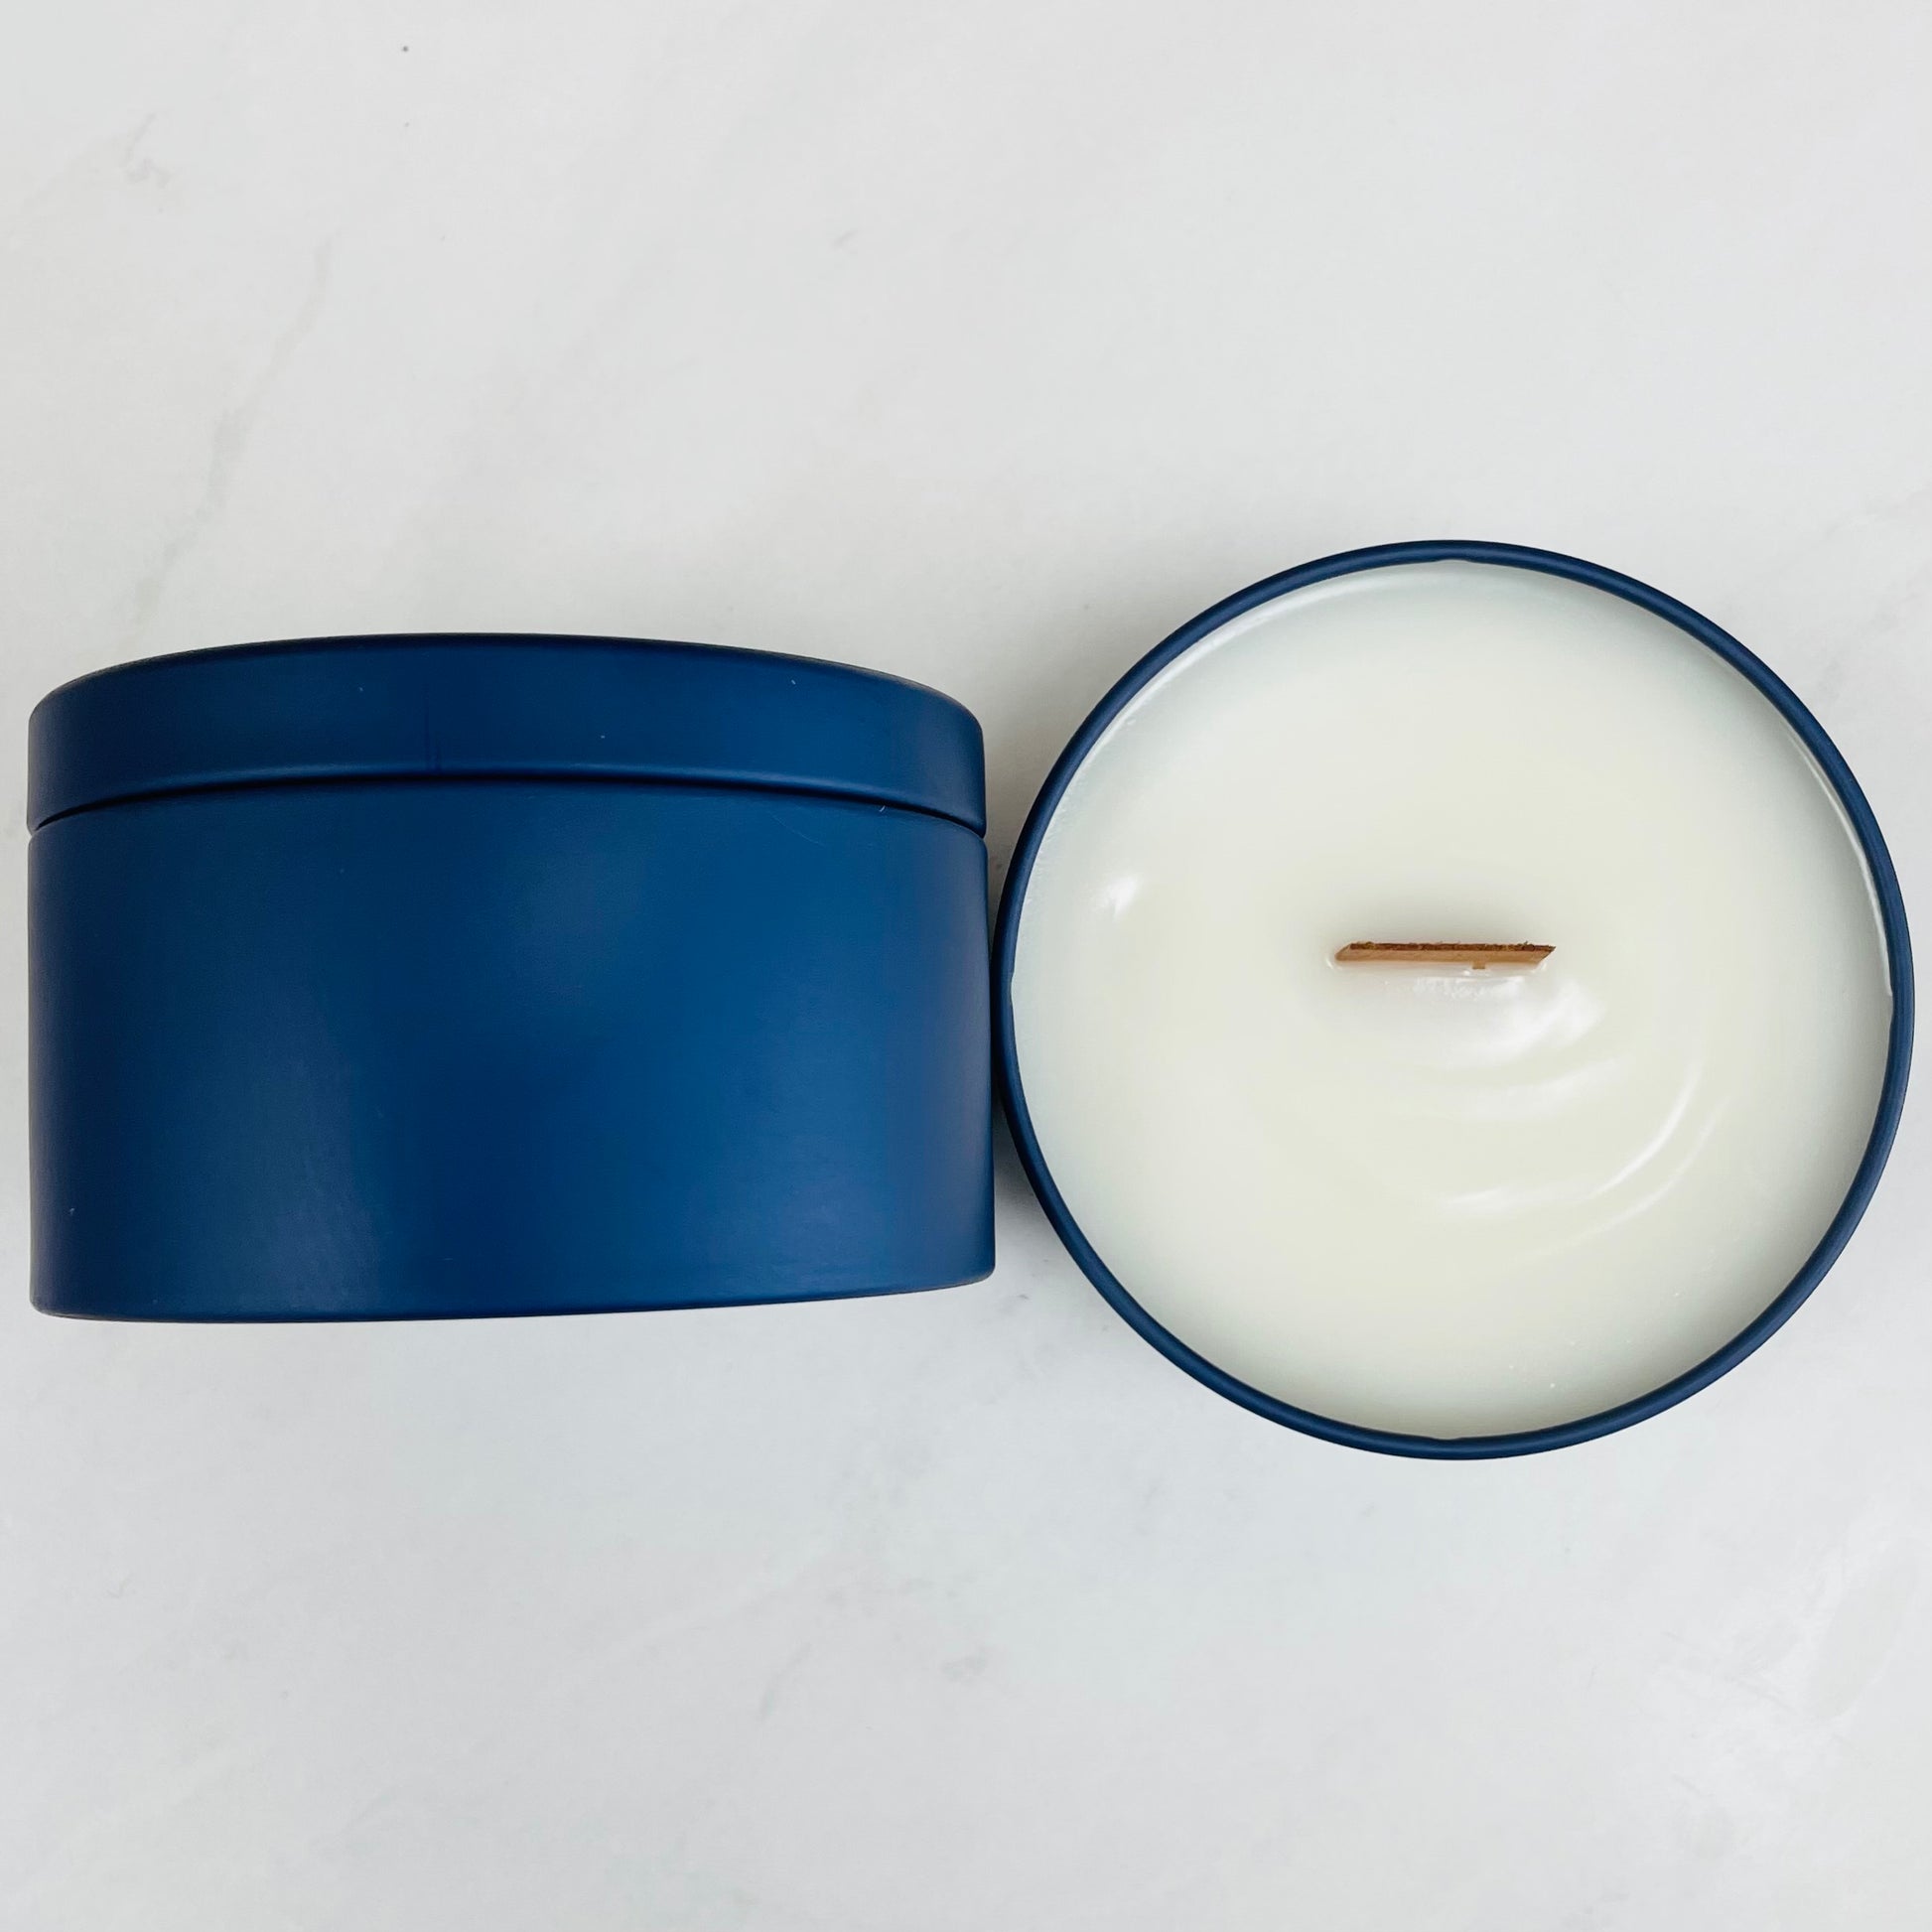 Lavender Harmony Luxury Candle in a 8oz navy metal tin with a matching lid